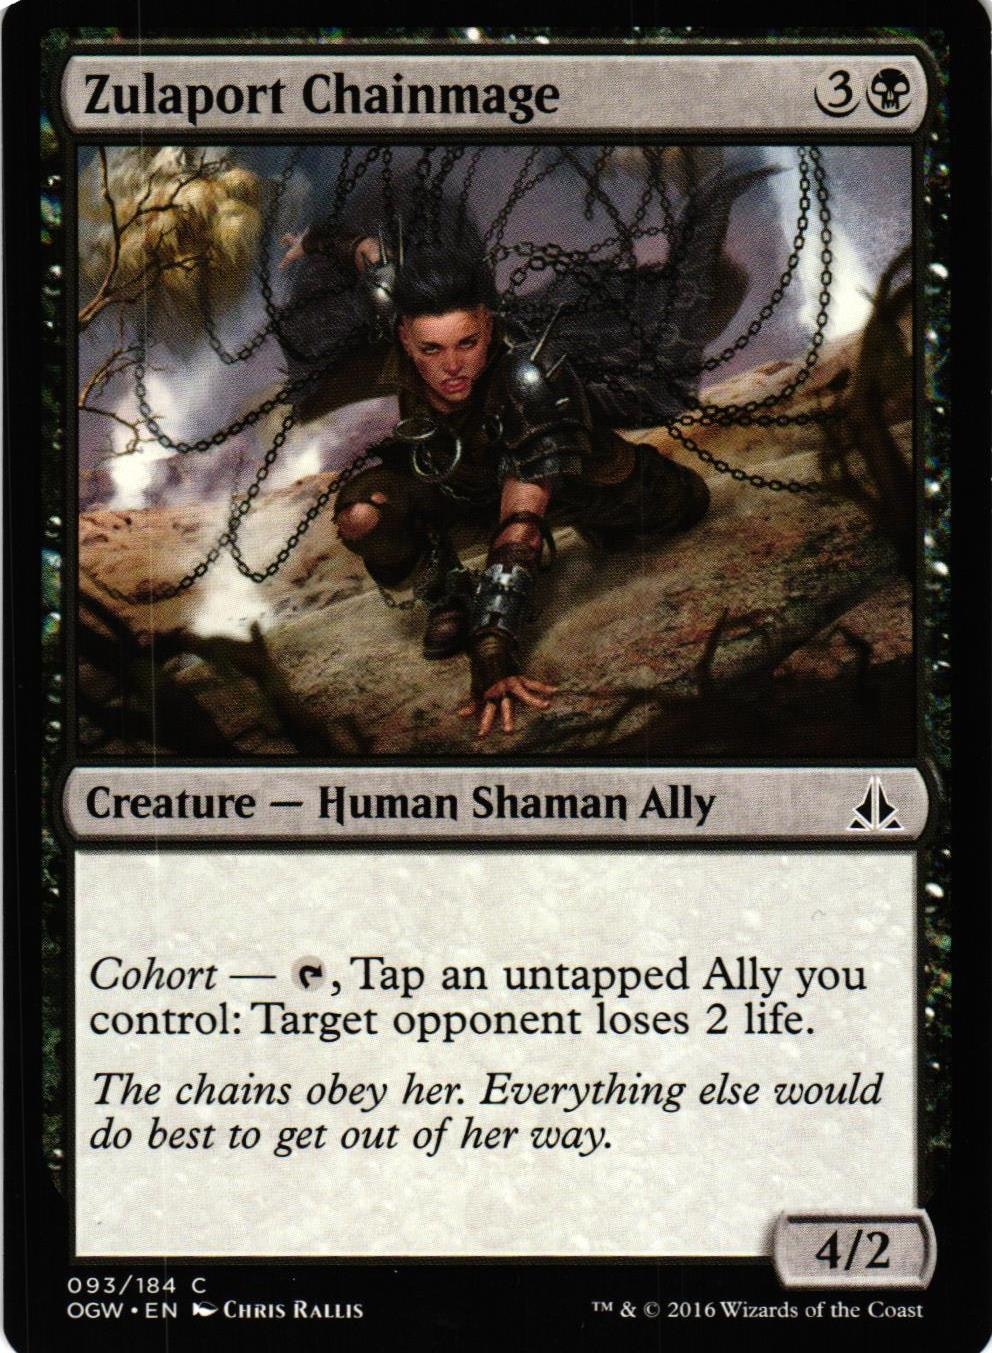 Zulaport Chainmage Common 093/184 Oath of the Gatewatch (OGW) Magic the Gathering